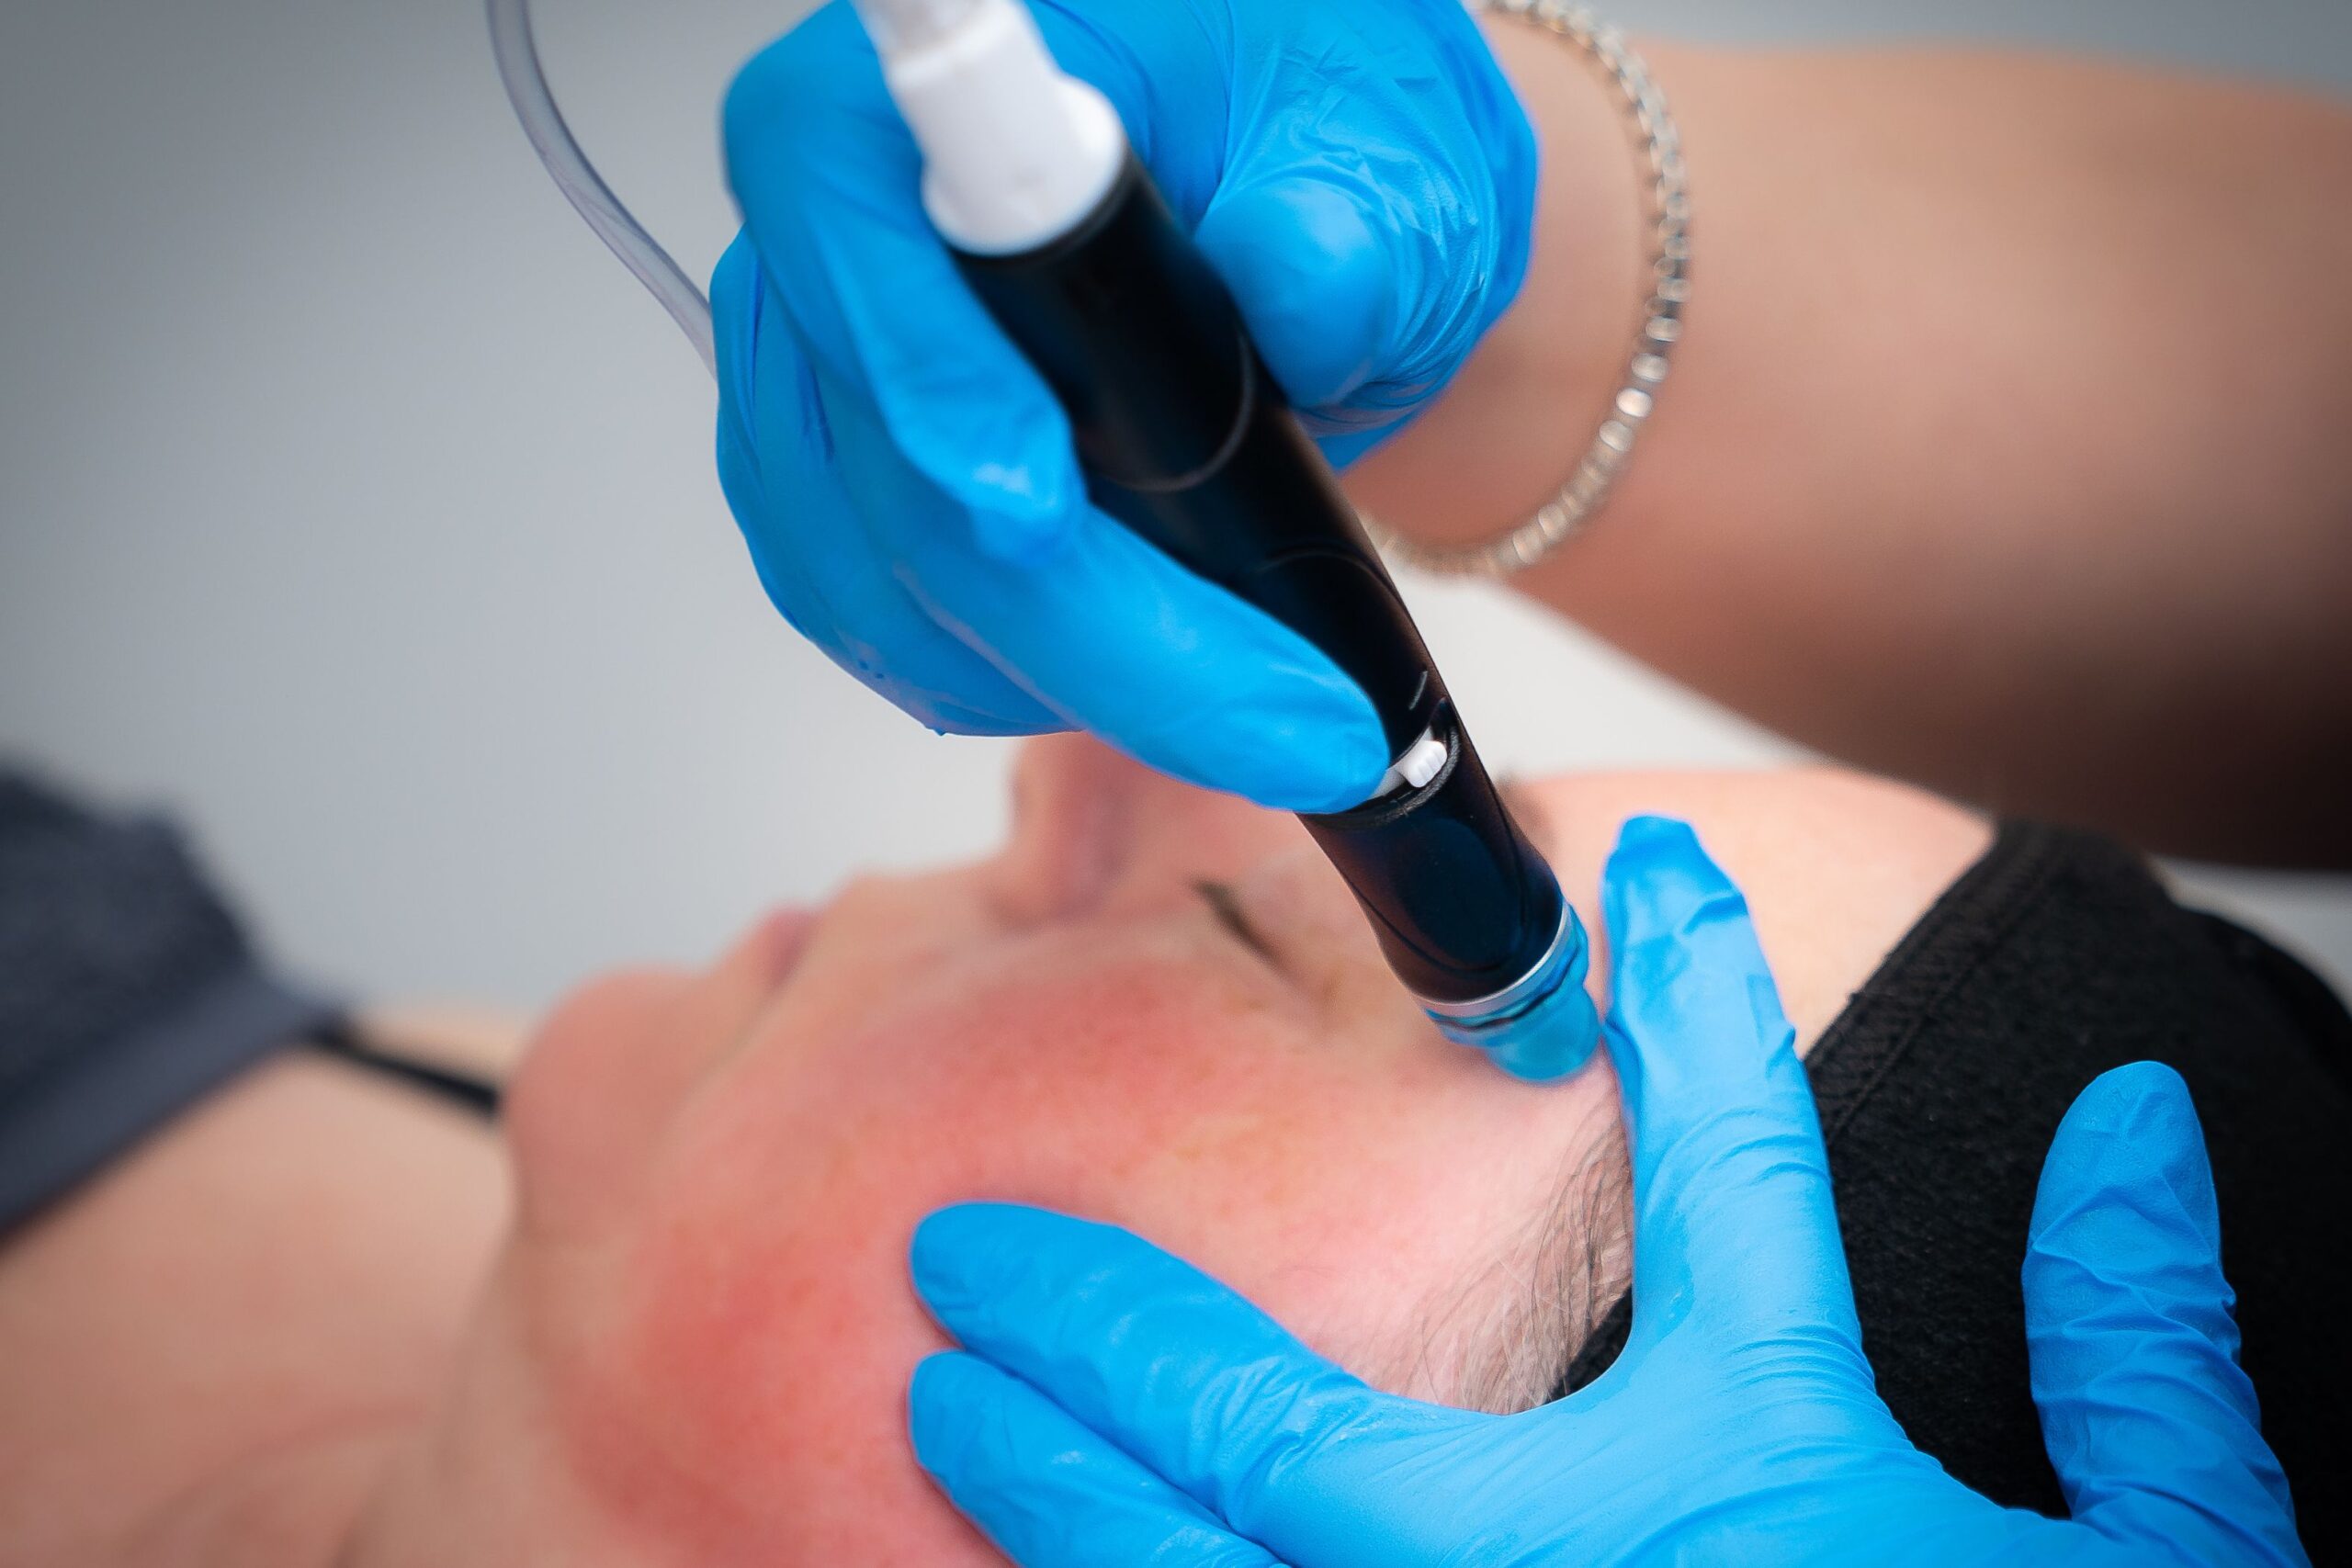 HydraFacial for Acne at Freyja Medical in Wrexham, Nantwich and Cheshire